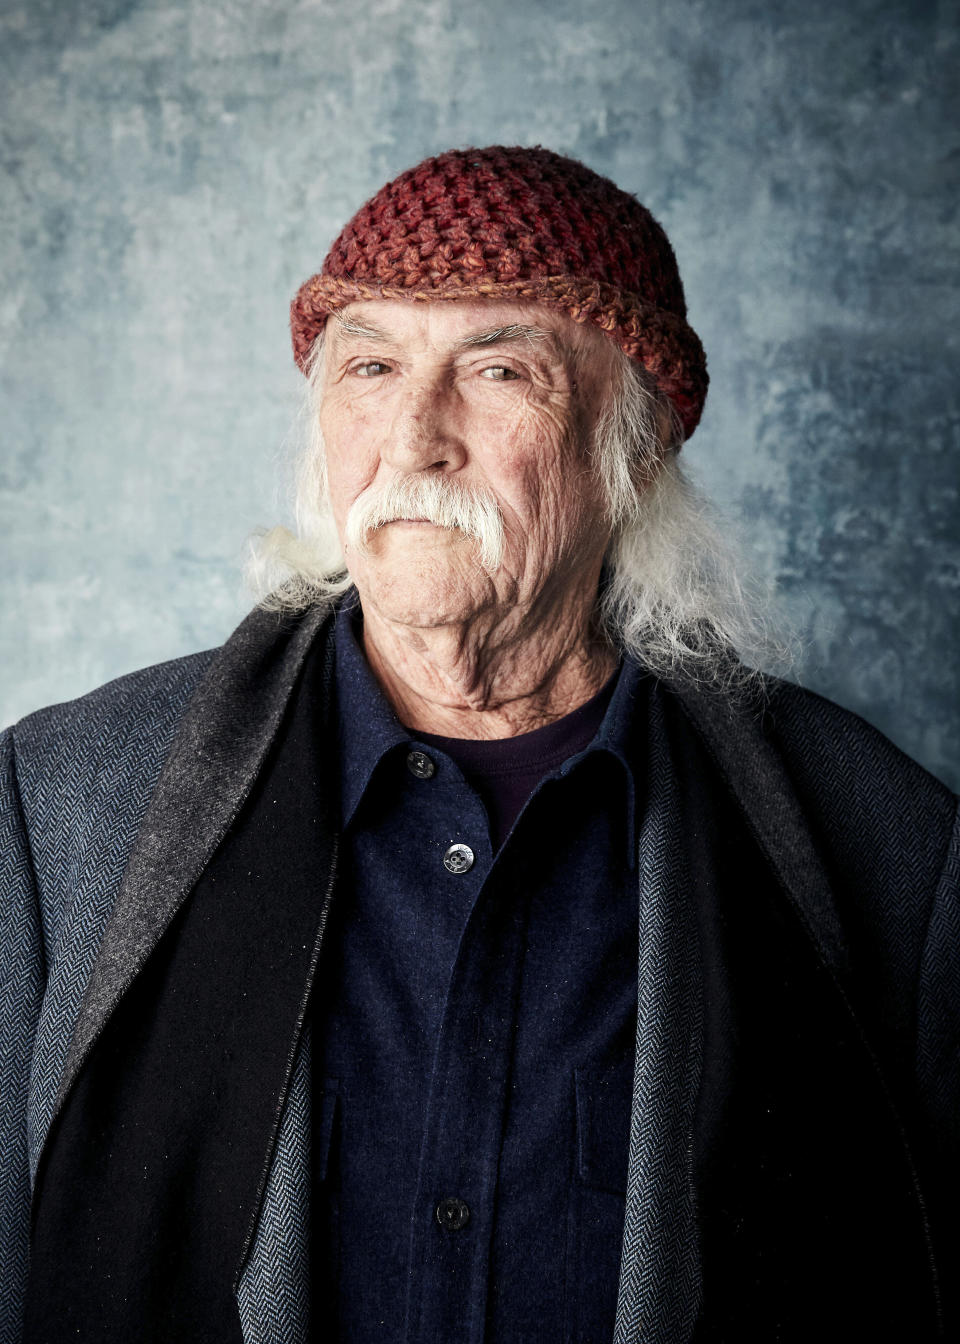 FILE - In this Jan. 26, 2019 file photo, David Crosby poses for a portrait to promote the film "David Crosby: Remember My Name" at the Salesforce Music Lodge during the Sundance Film Festival in Park City, Utah. Crosby offers candid reflections on his career, relationships and feuds with others in the new documentary, which will be in limited release on Friday, July 19, 2019, and expand to additional theaters in the coming weeks. (Photo by Taylor Jewell/Invision/AP, File)